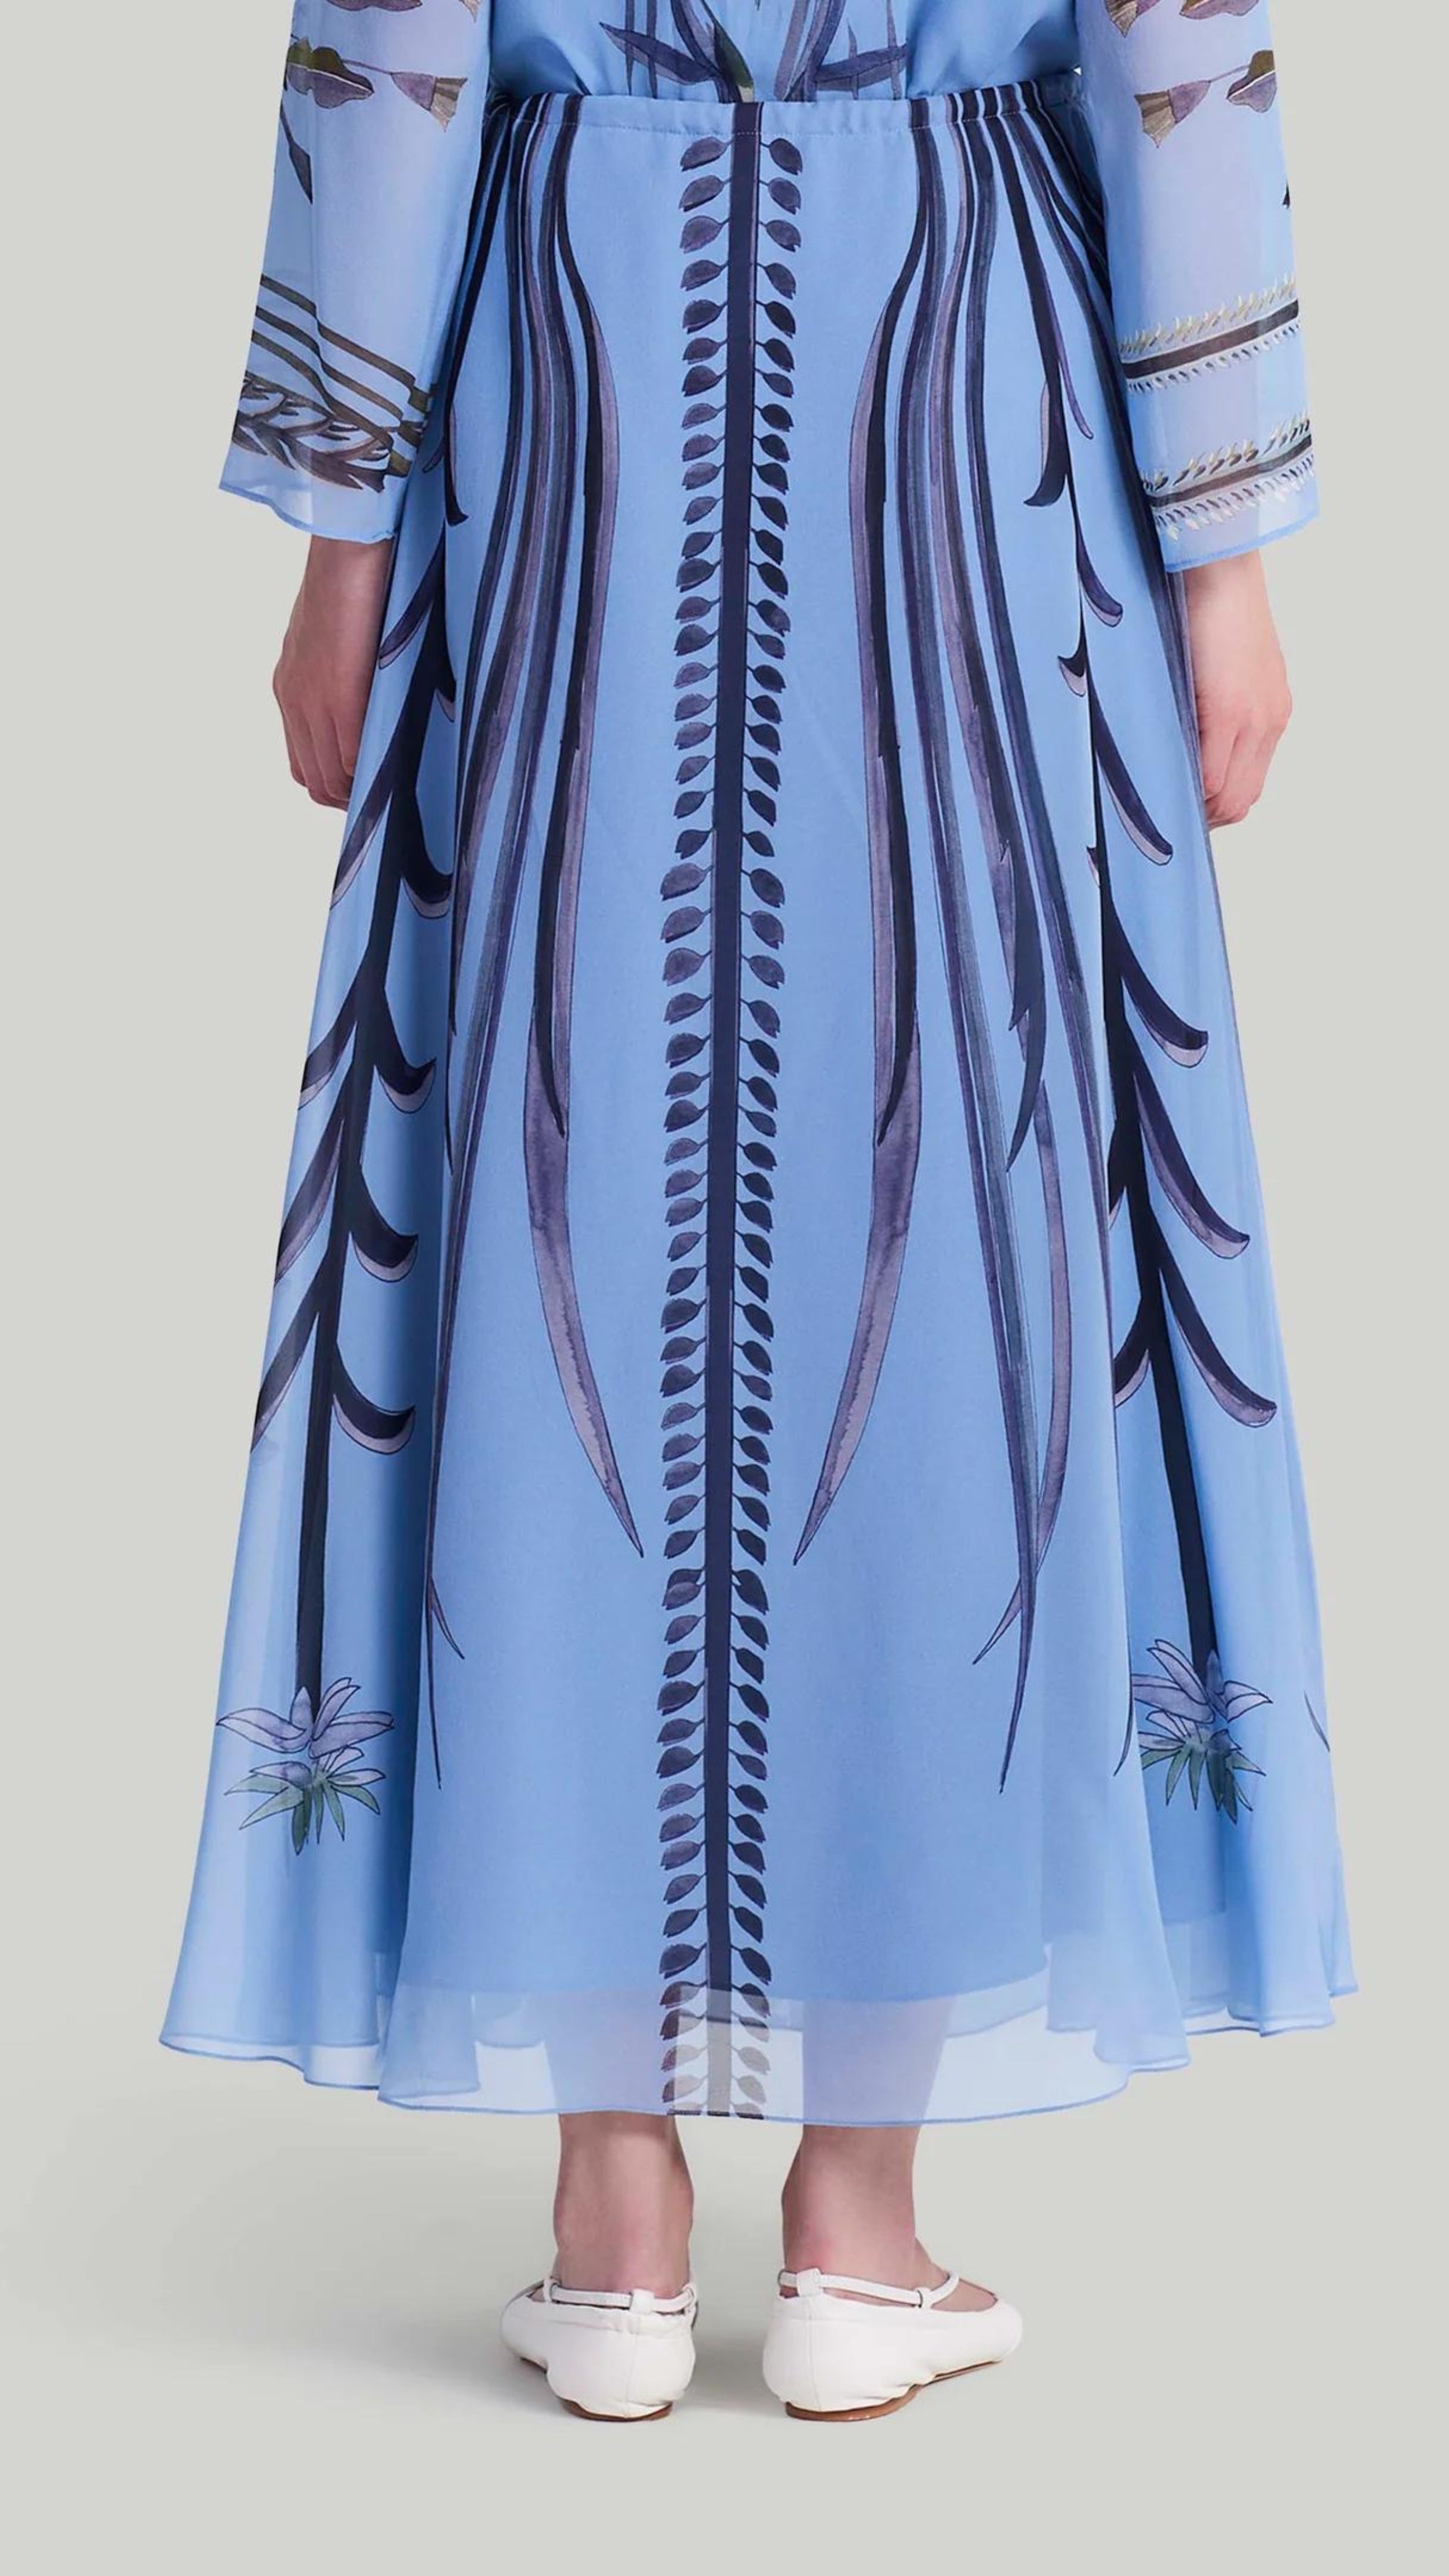 Altuzarra Roxana Skirt. Sky blue, navy blue and violet highlight. Hand painted skirt with adjustable tied at the waist. Midi length. Natural pattern. Shown on model facing back.